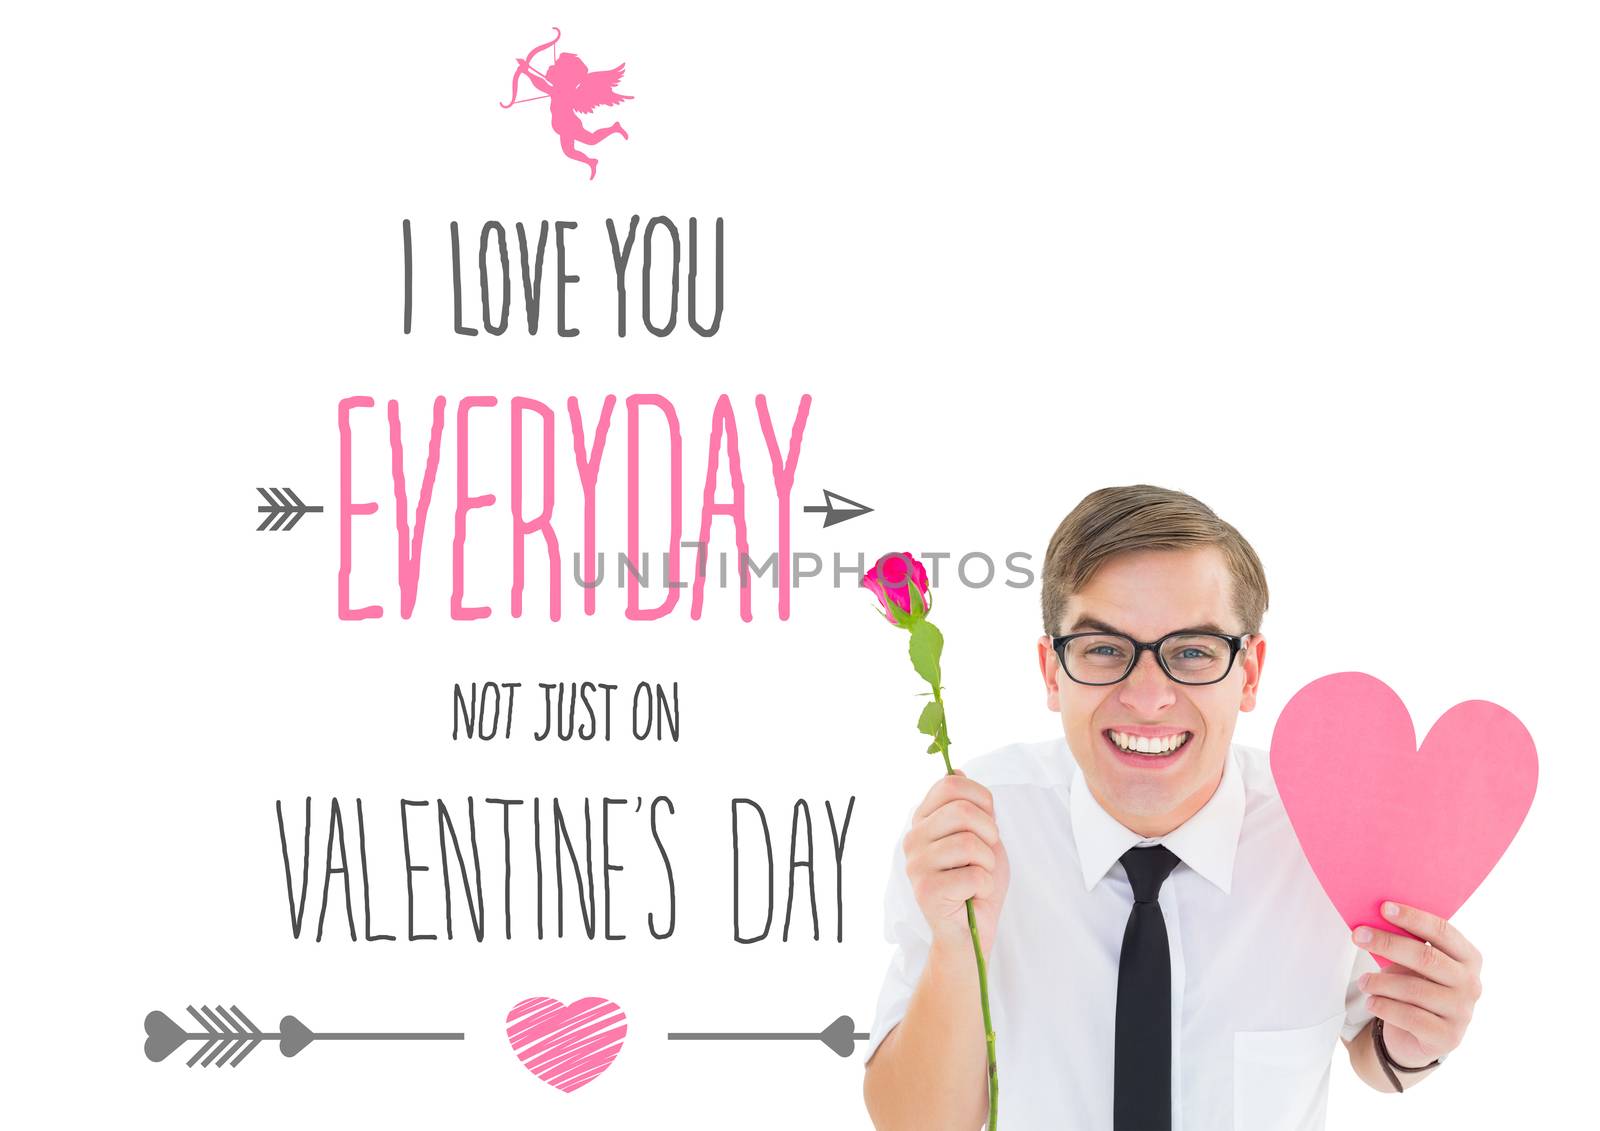 Romantic geeky hipster against valentines day greeting